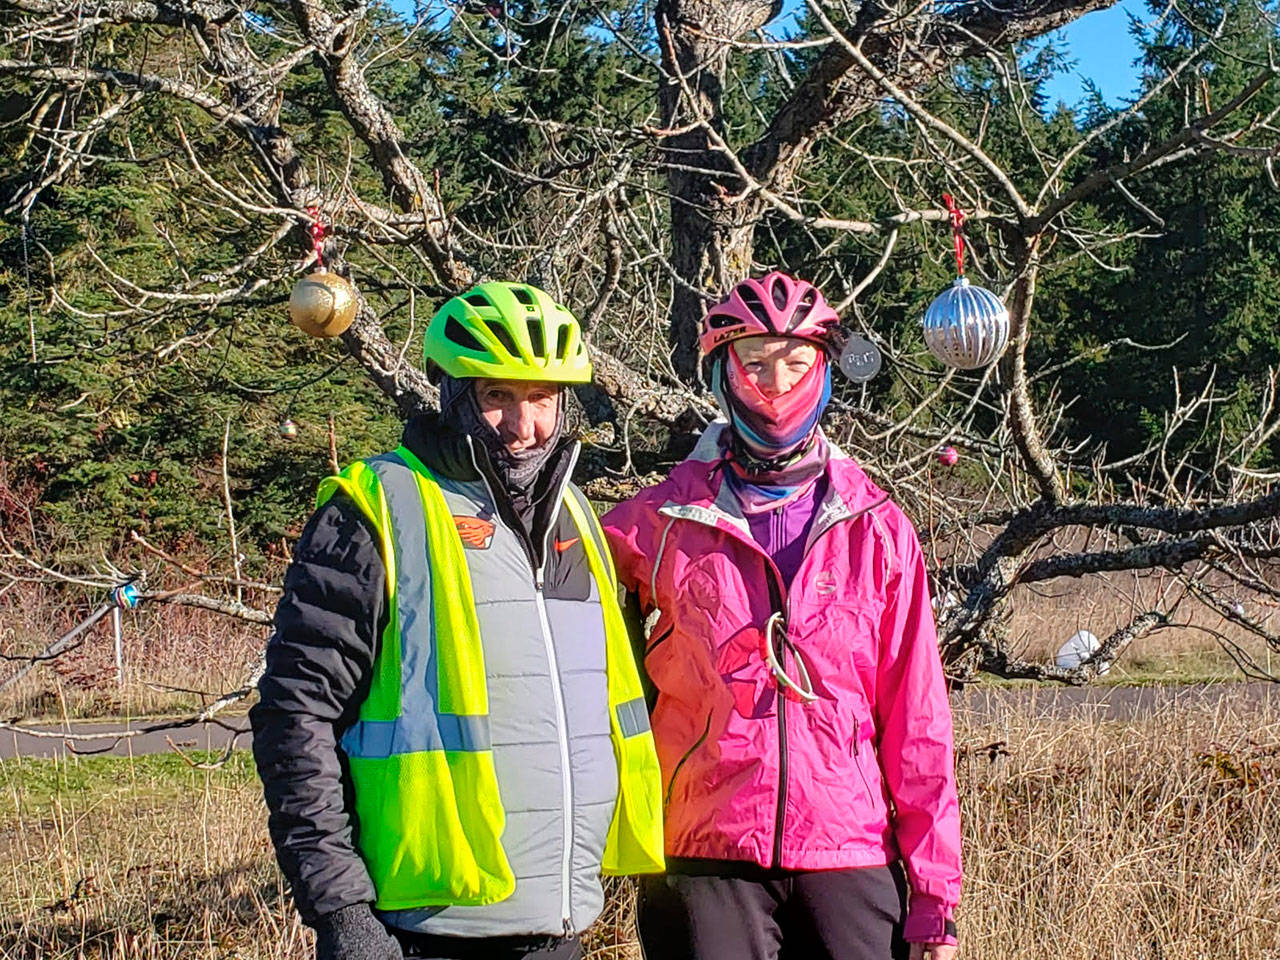 Larry Aillaud and Leilani Sundt enjoy a crisp December day with friends decorating a tree near the “Sequim welcomes you” sign on the east end of town near Whitefeather Way, between the Olympic Discovery Trail and U.S. Highway 101. For years a group of bicycle enthusiasts have decorated the tree with ornaments and tinsel. COVID-19 pandemic restrictions kept the group from joining together but a few gathered last week to spruce up the tree with some holiday cheer. Photo by Natalie Elfant